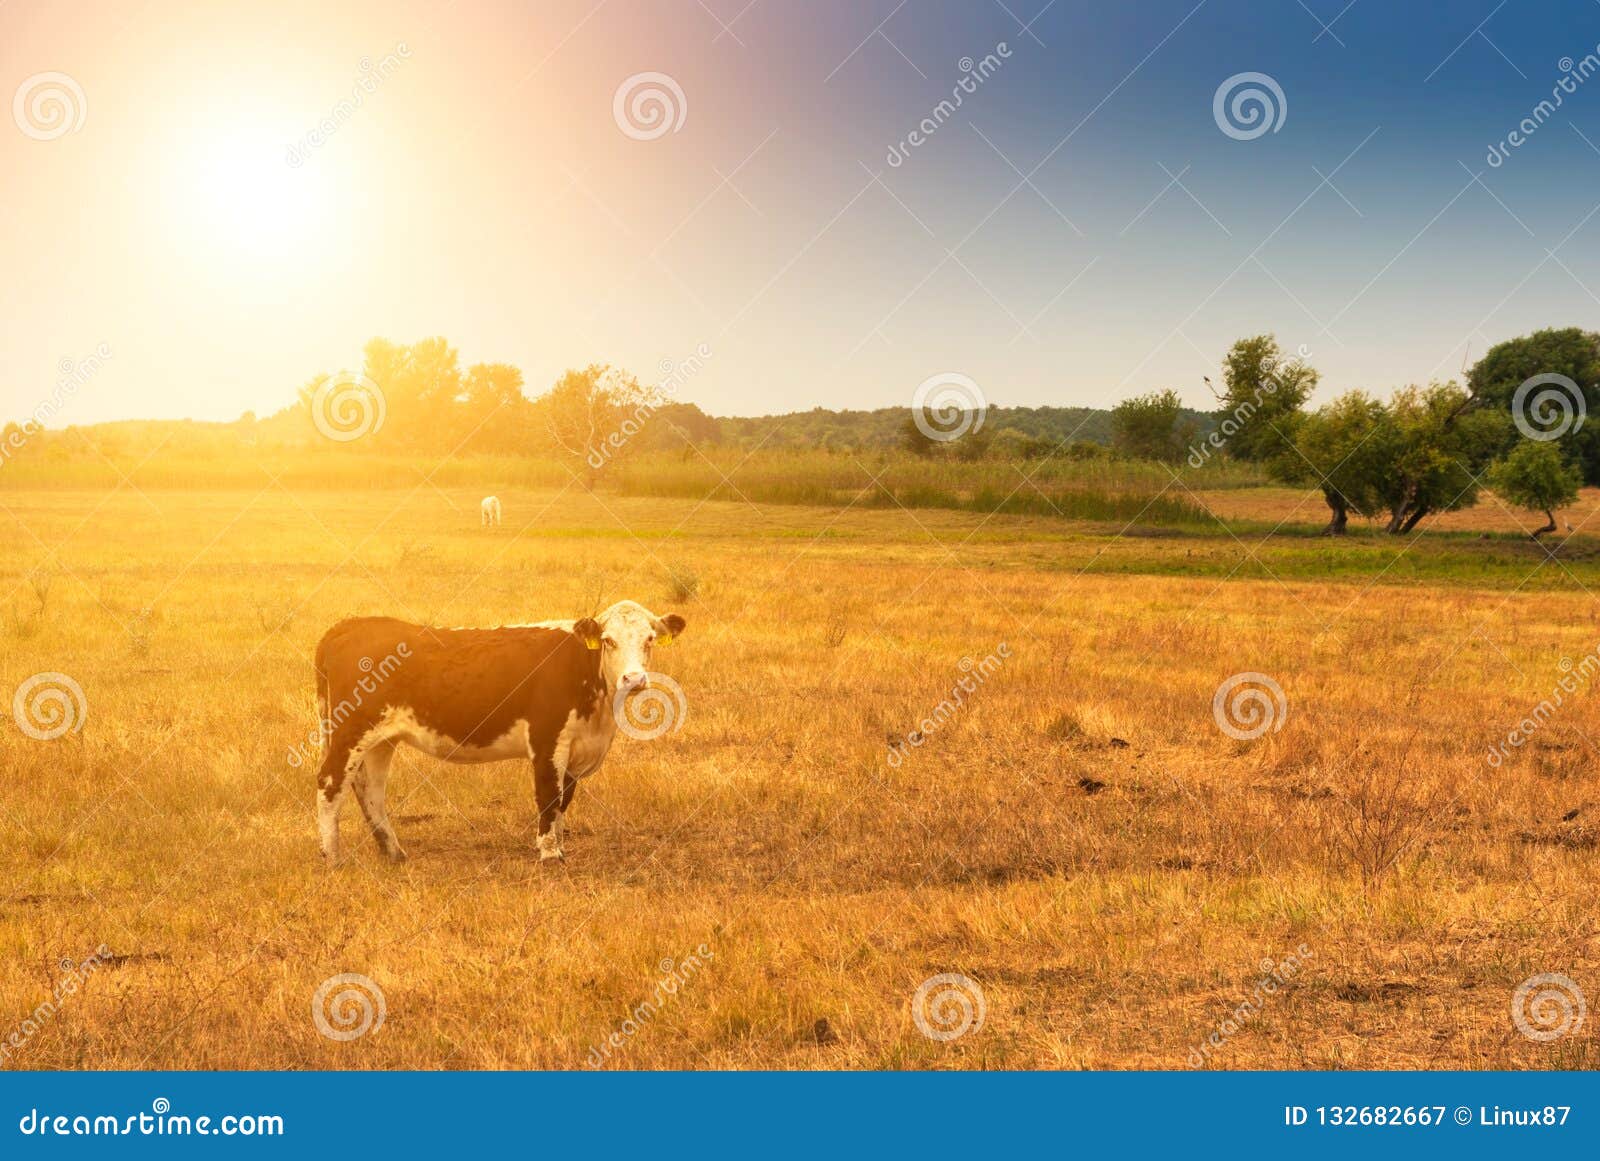 cow on pasture